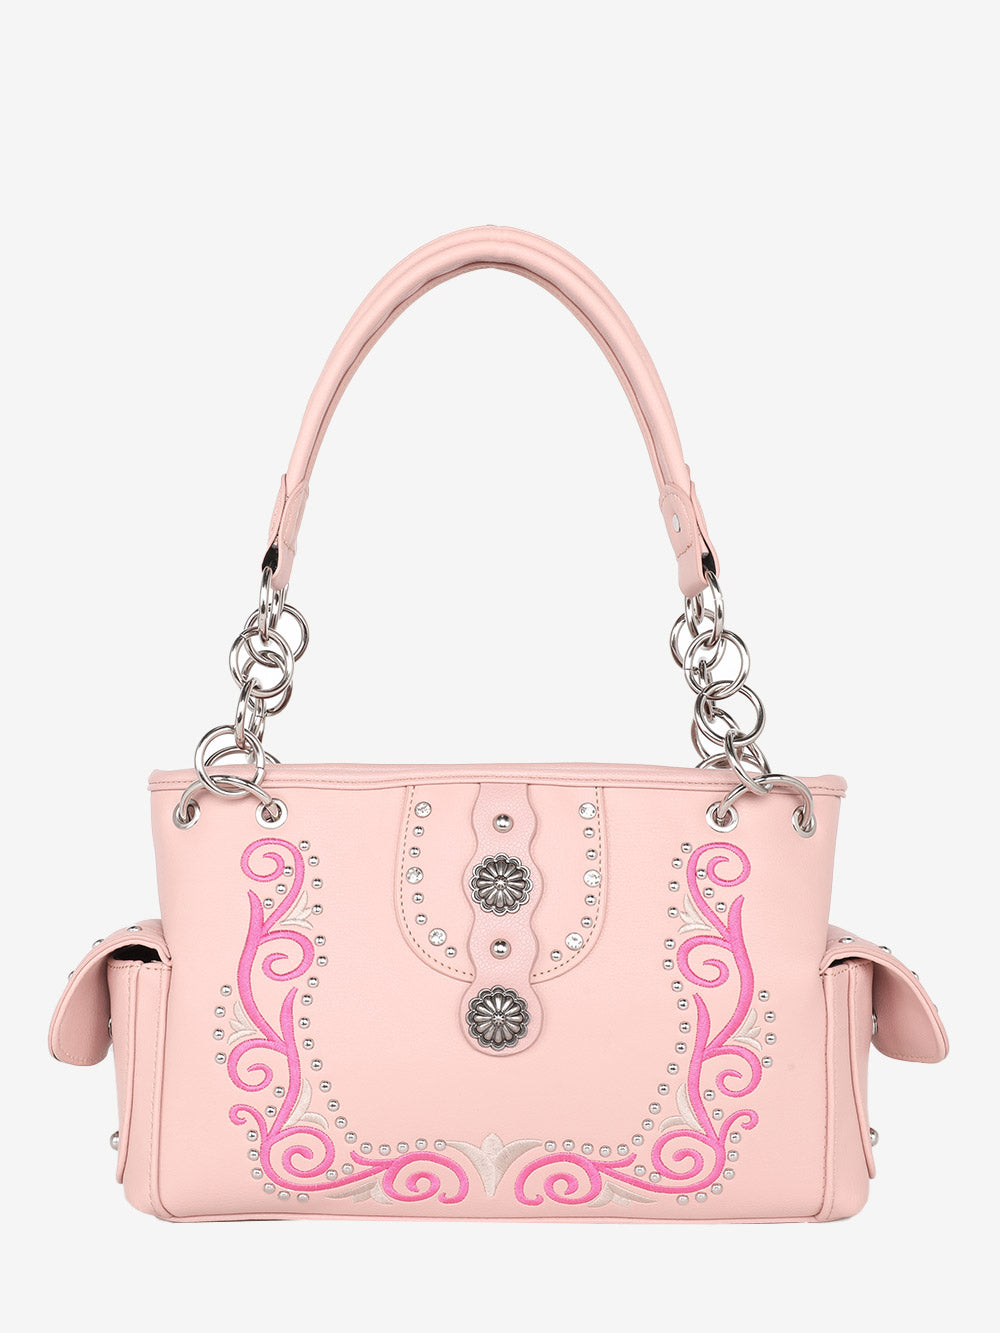 American Bling Pink Embroidered Floral Satchel and Wallet Set - Montana West World